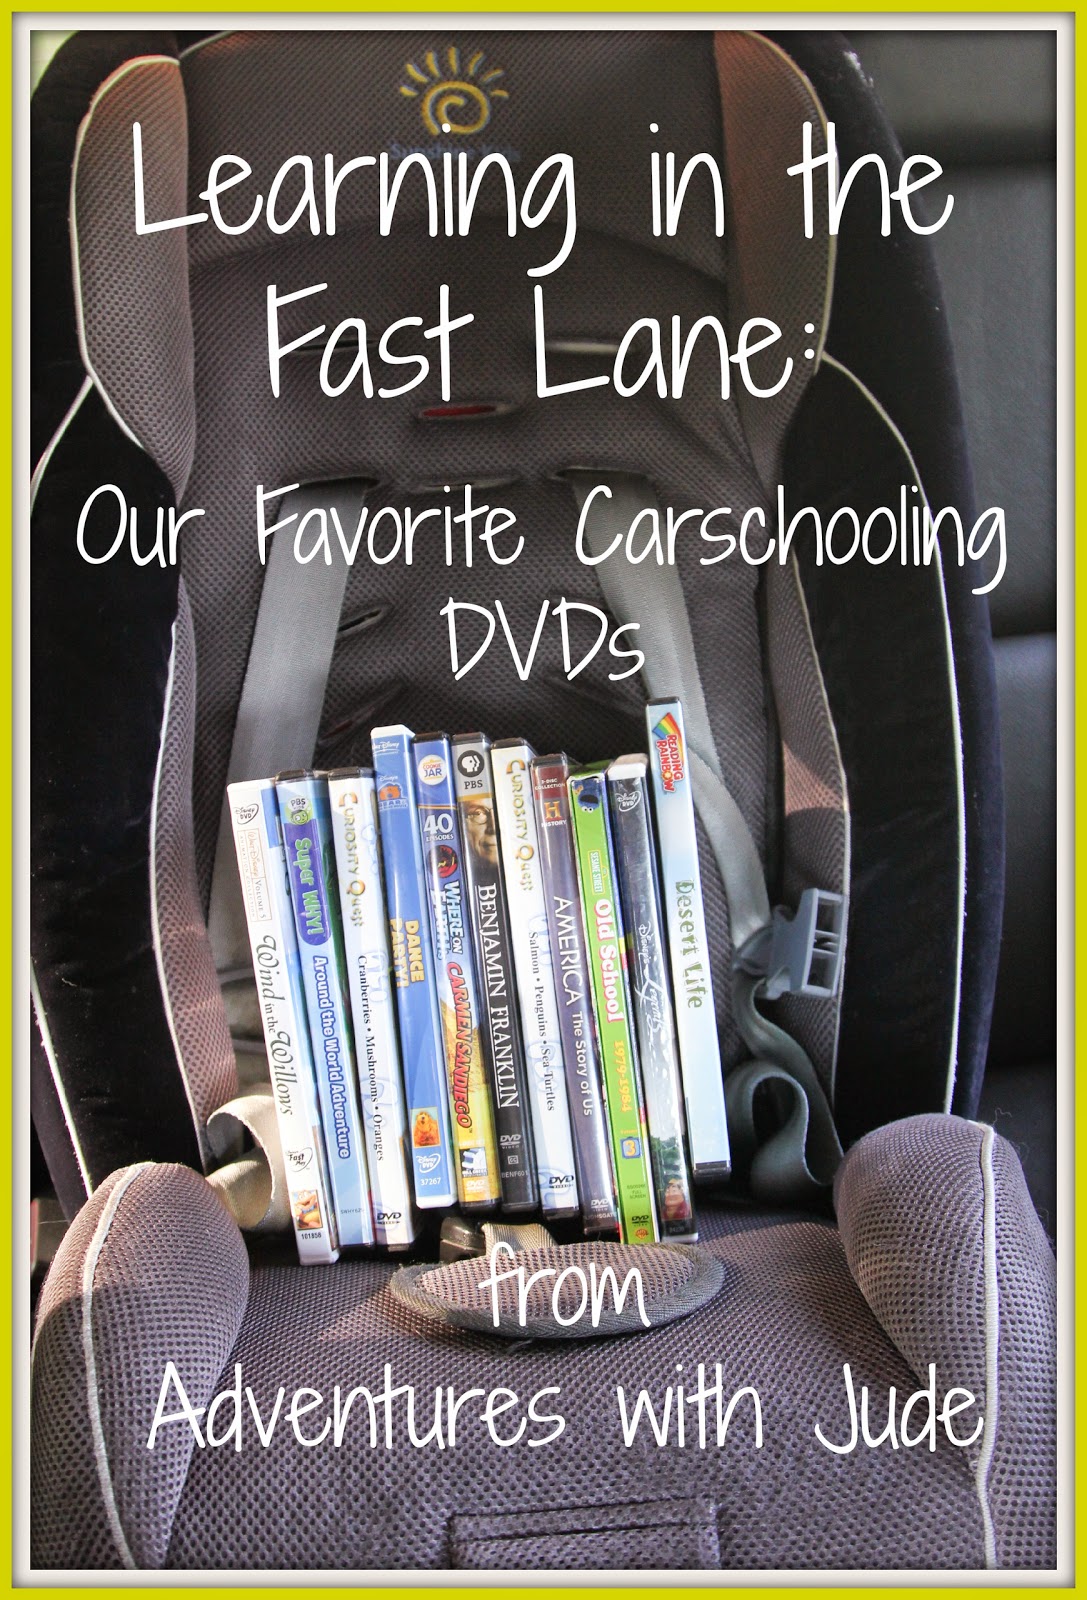 Our Favorite Carschooling DVDs (PK & early elementary)